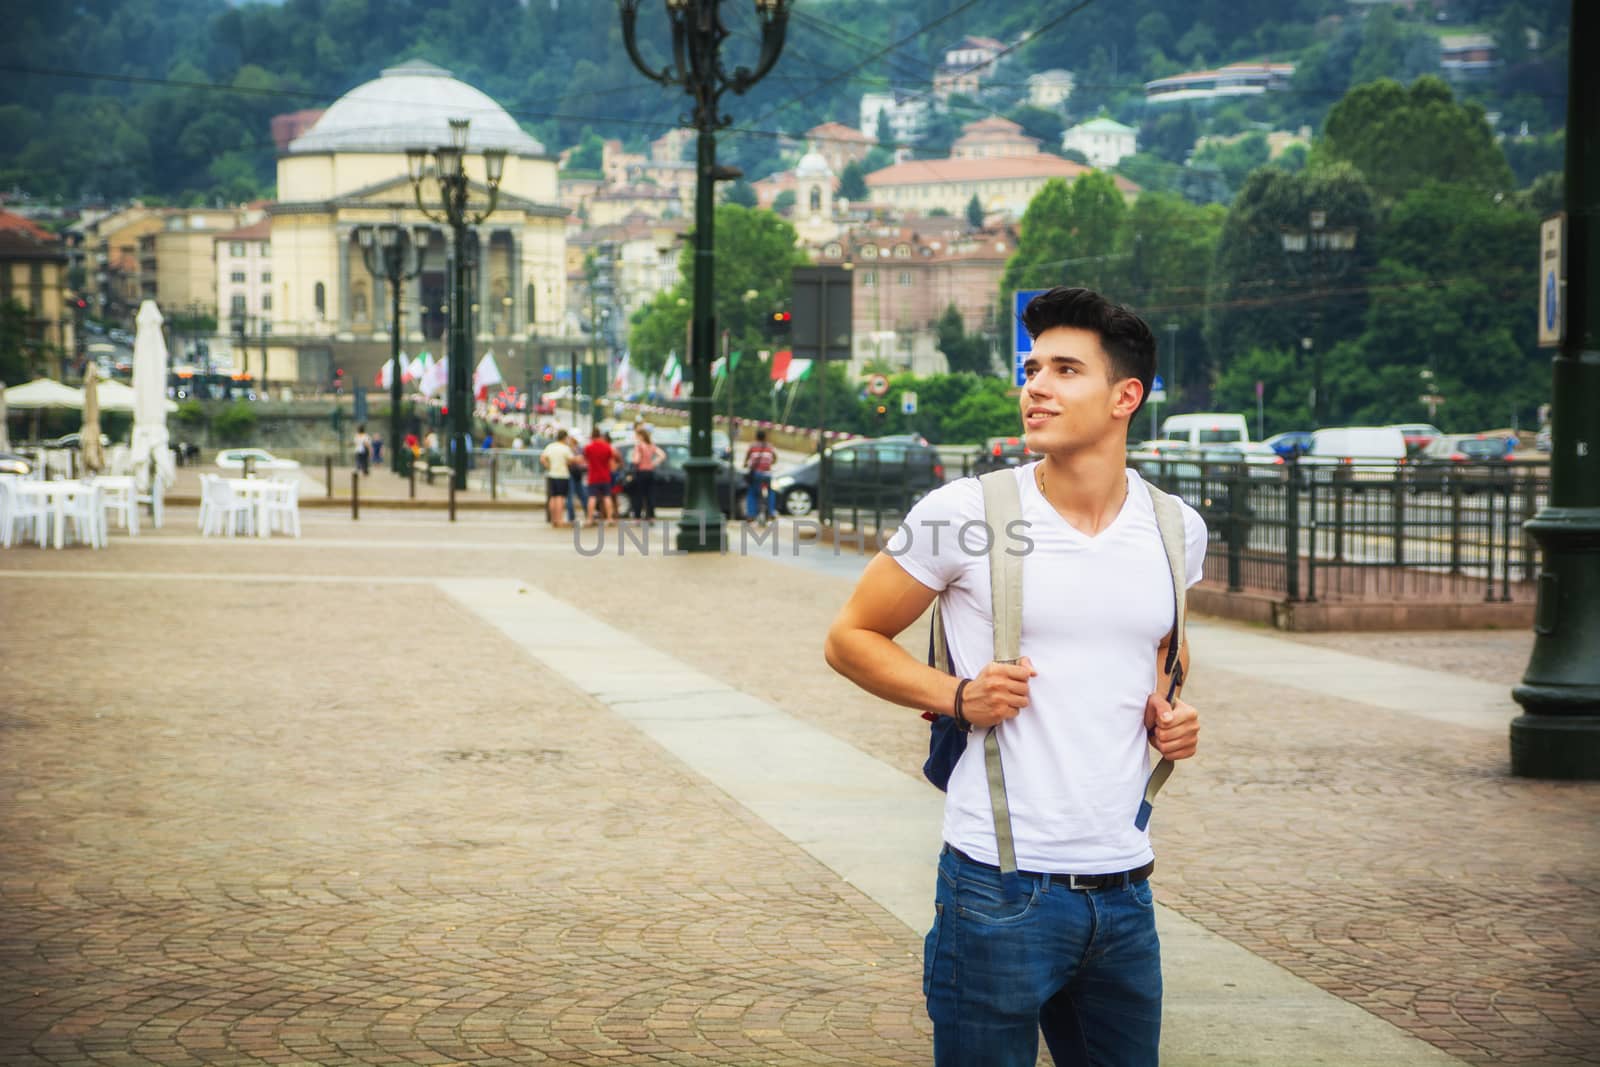 Handsome young man walking in European city square by artofphoto